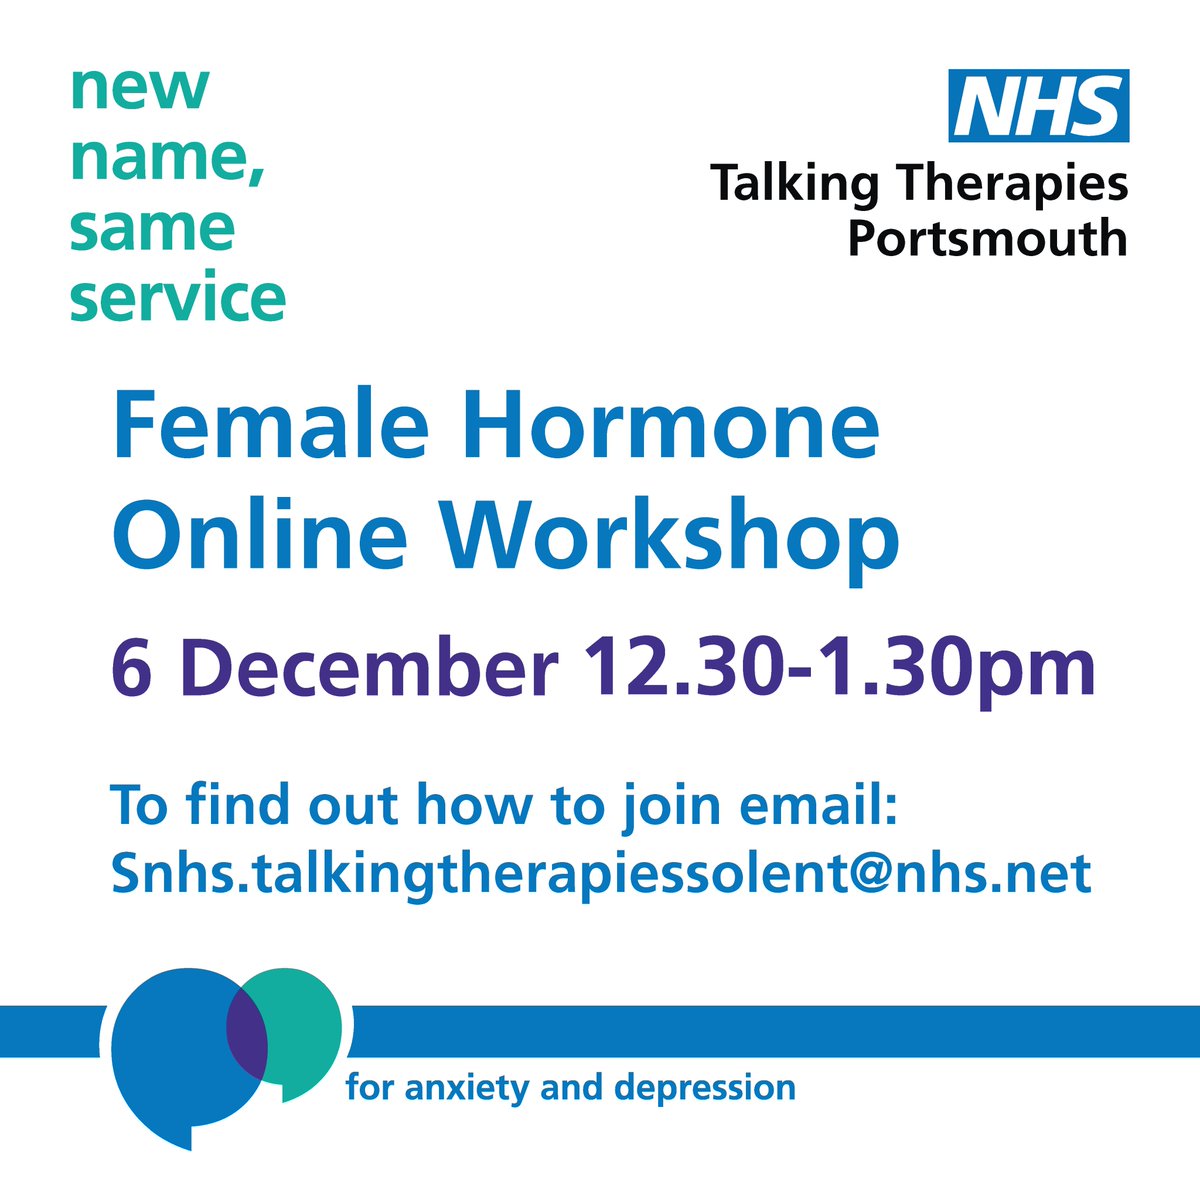 We (soon to be NHS Talking Therapies Portsmouth) will be running a female hormone online workshop, for anyone who is affected by female hormones whether directly or indirectly (partners, employers etc).